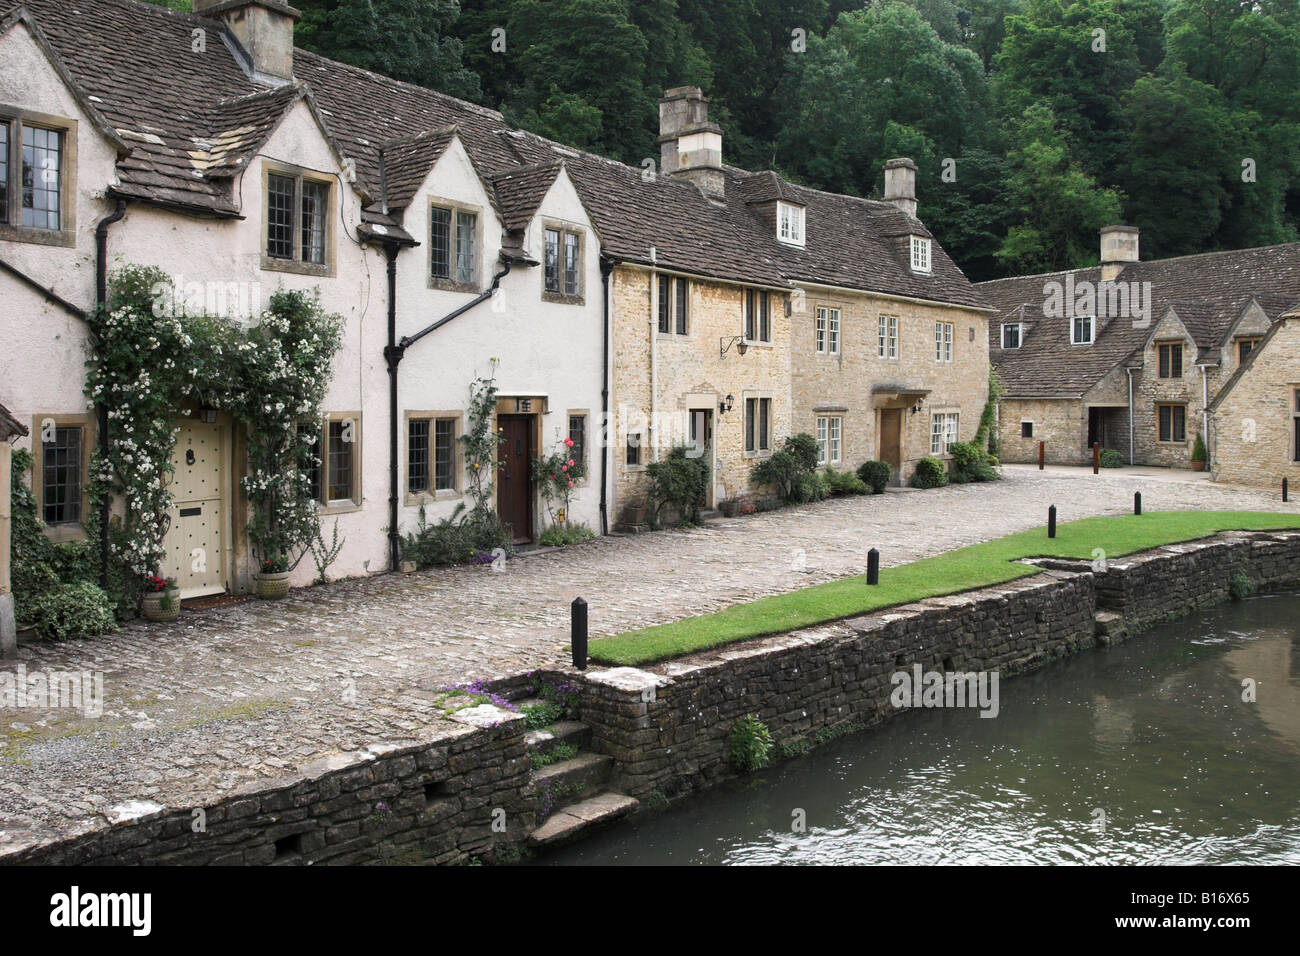 Picturesque cottages overlooking By Brook, the river which runs through Castle Combe, The Cotswolds, Wiltshire, England, UK Stock Photo